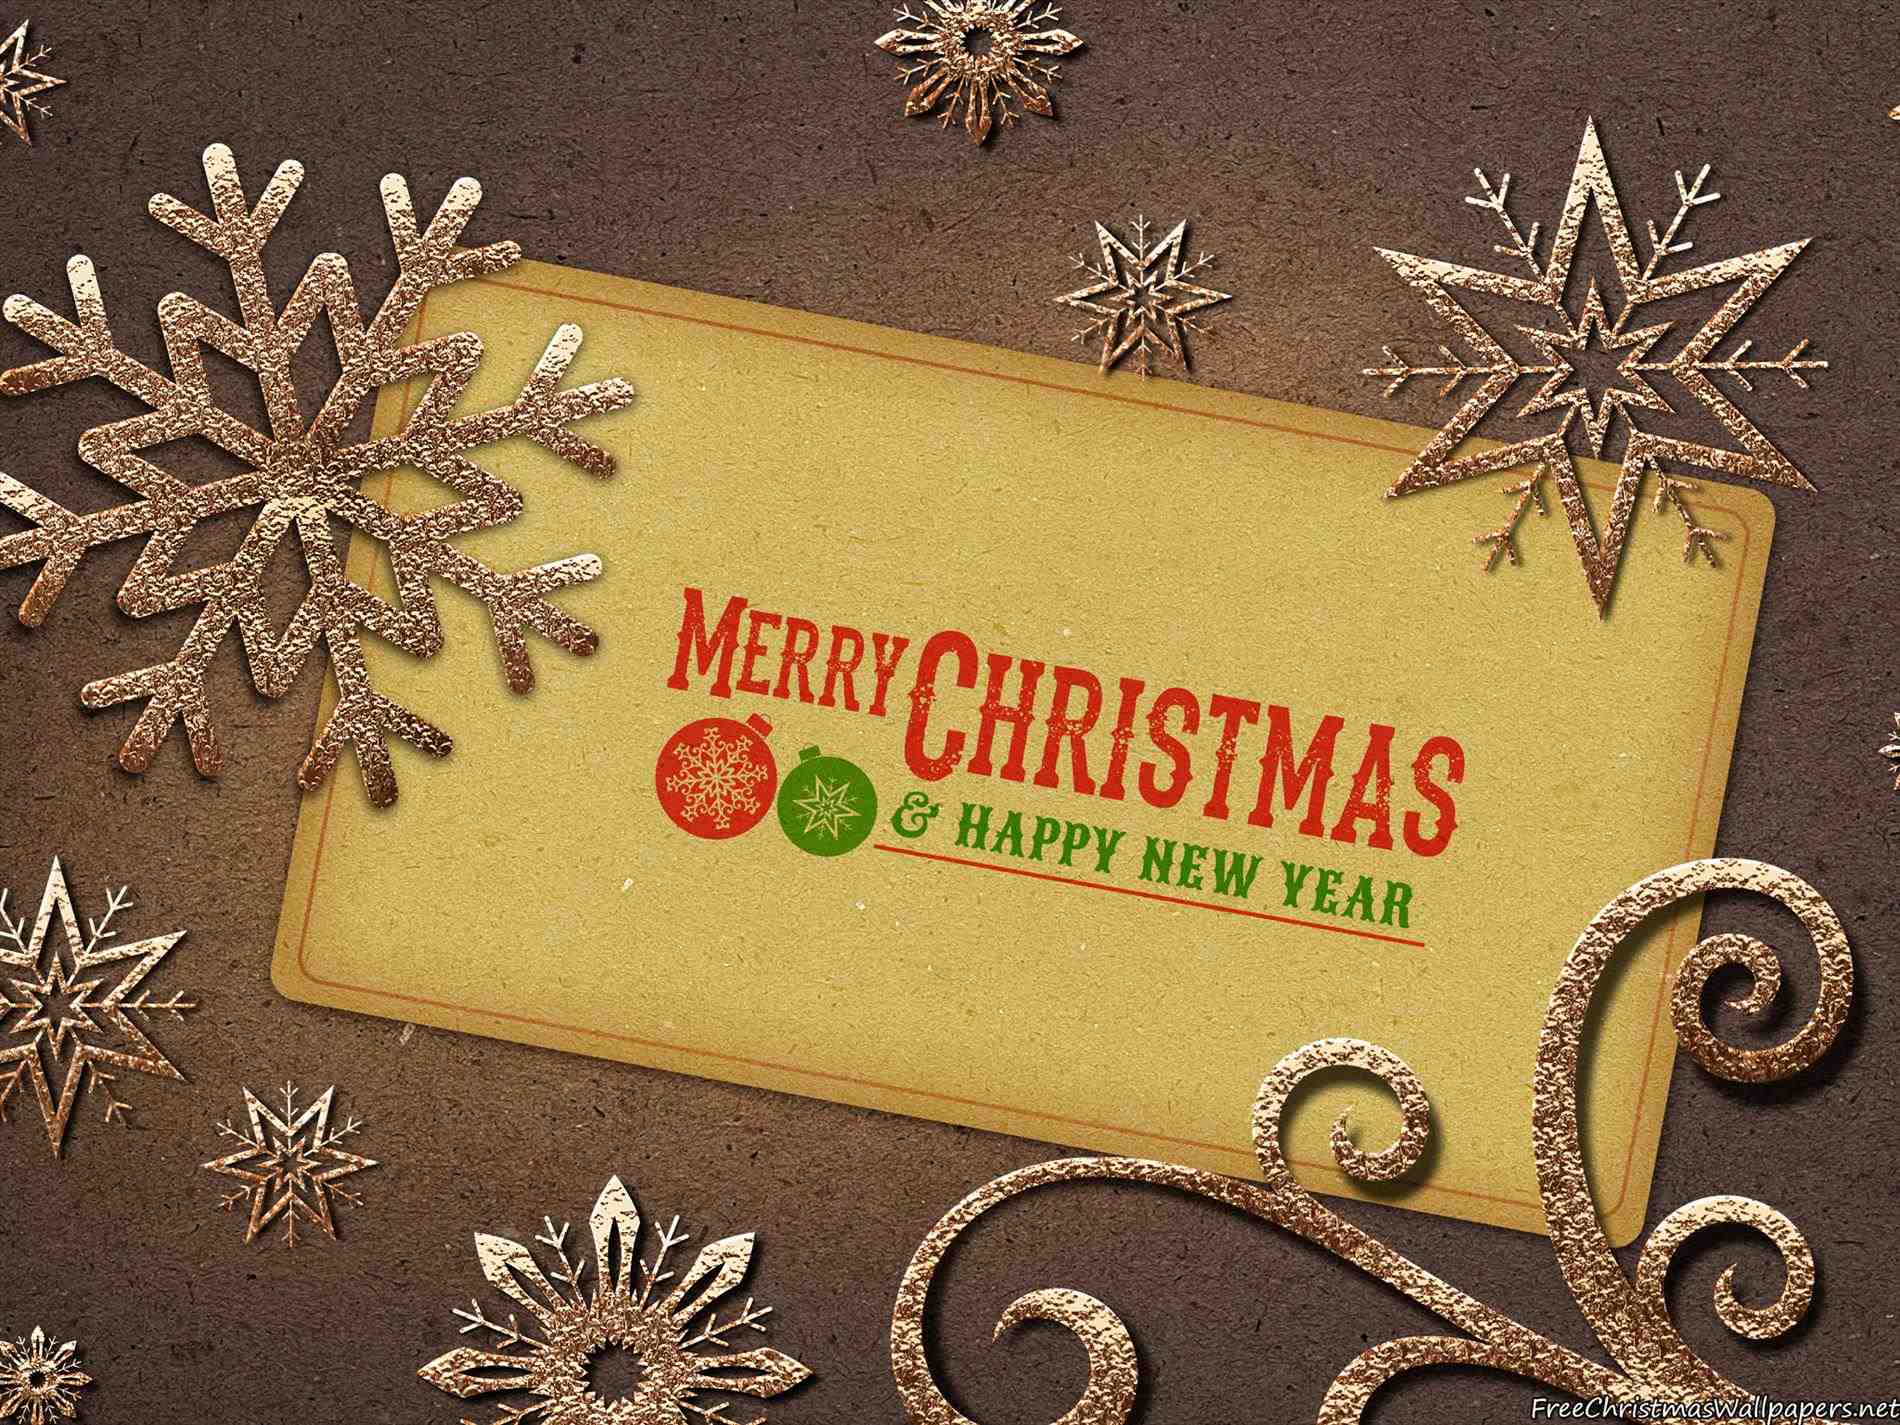 25 Christmas Wallpapers for iPhone  Cute and Vintage Backgrounds  Wallpaper  iphone christmas Christmas wallpaper hd Christmas wallpaper